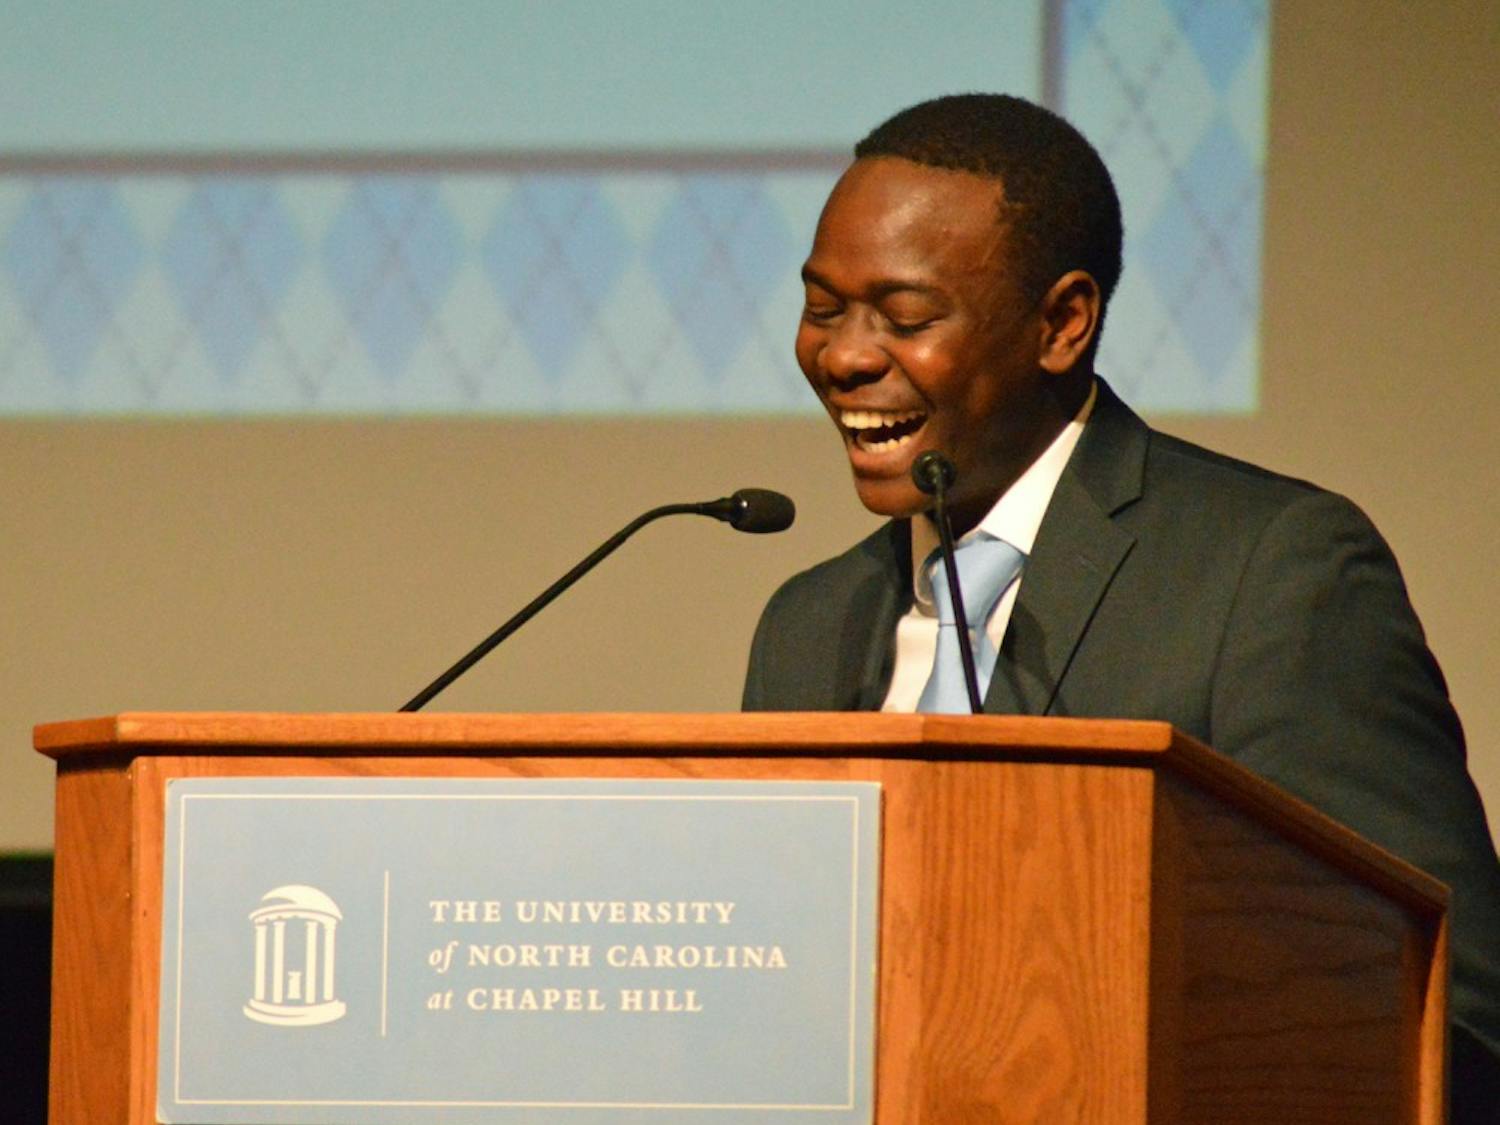 UNC Student Body President Bradley Opere gives his inaugural address on Tuesday, April 5th minutes after he is officially sworn in.